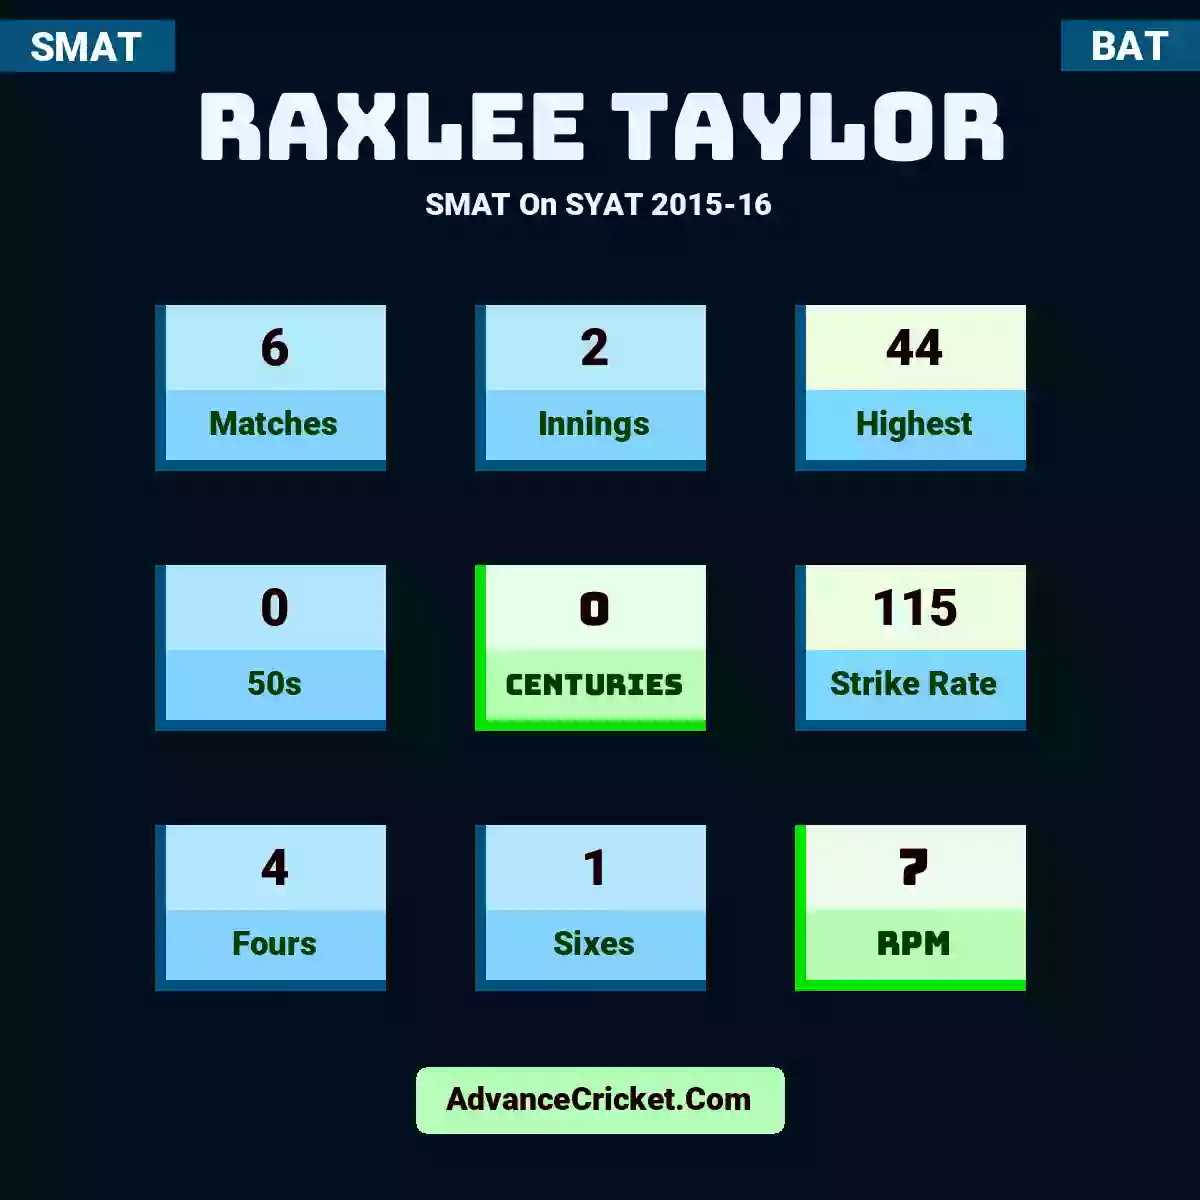 Raxlee Taylor SMAT  On SYAT 2015-16, Raxlee Taylor played 6 matches, scored 44 runs as highest, 0 half-centuries, and 0 centuries, with a strike rate of 115. R.Taylor hit 4 fours and 1 sixes, with an RPM of 7.